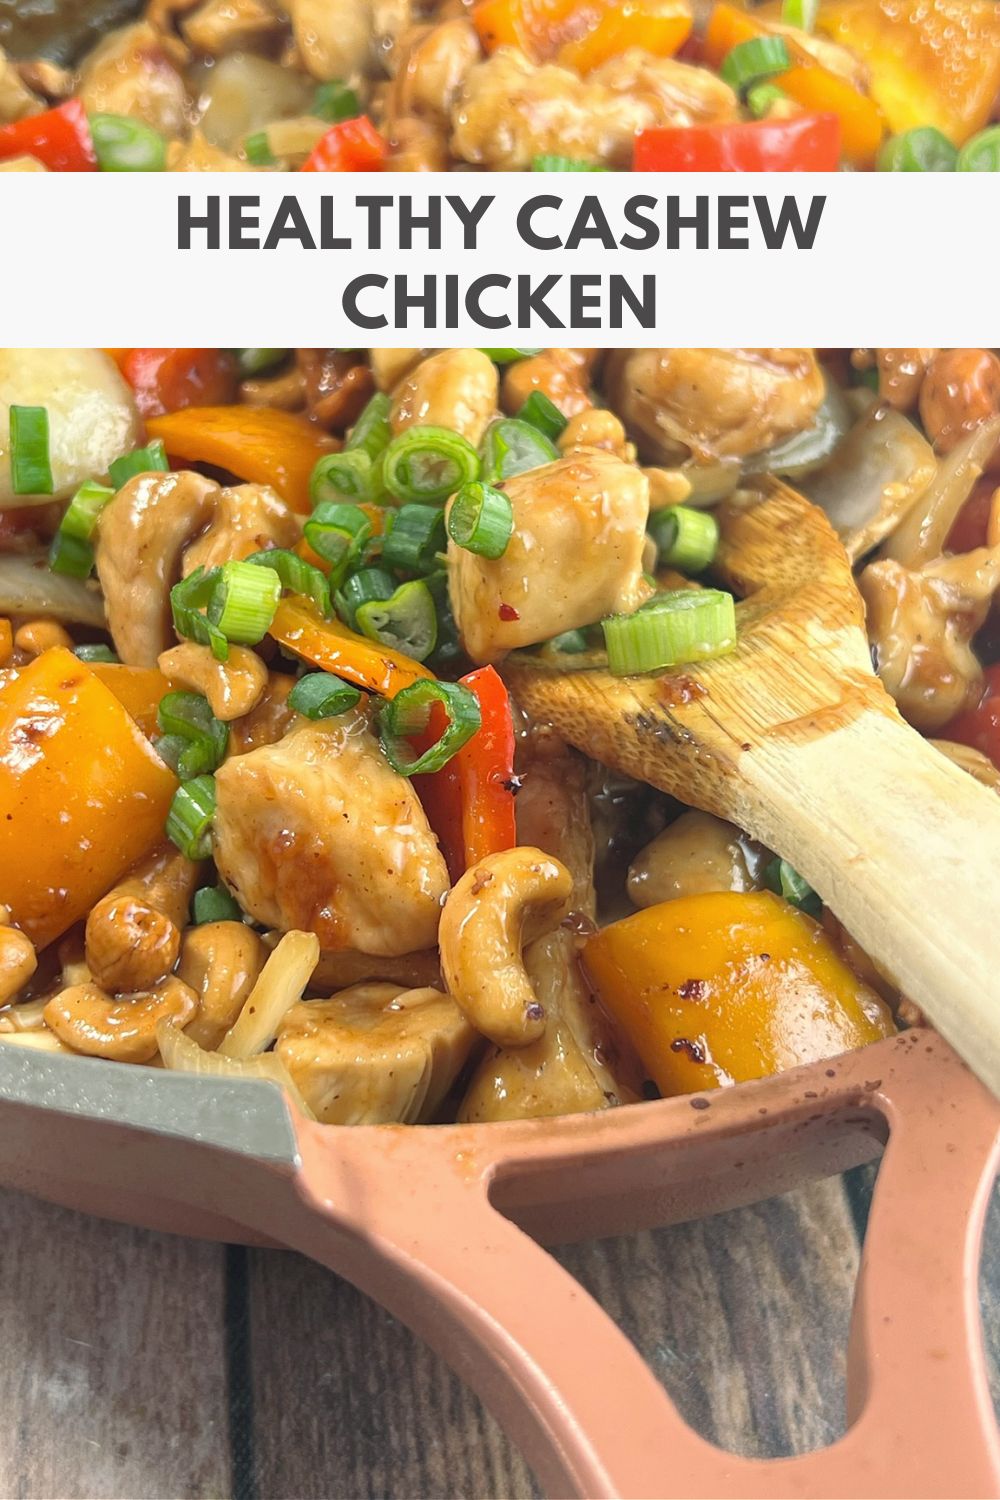 Healthy Cashew Chicken {Better than Takeout} via @preventionrd